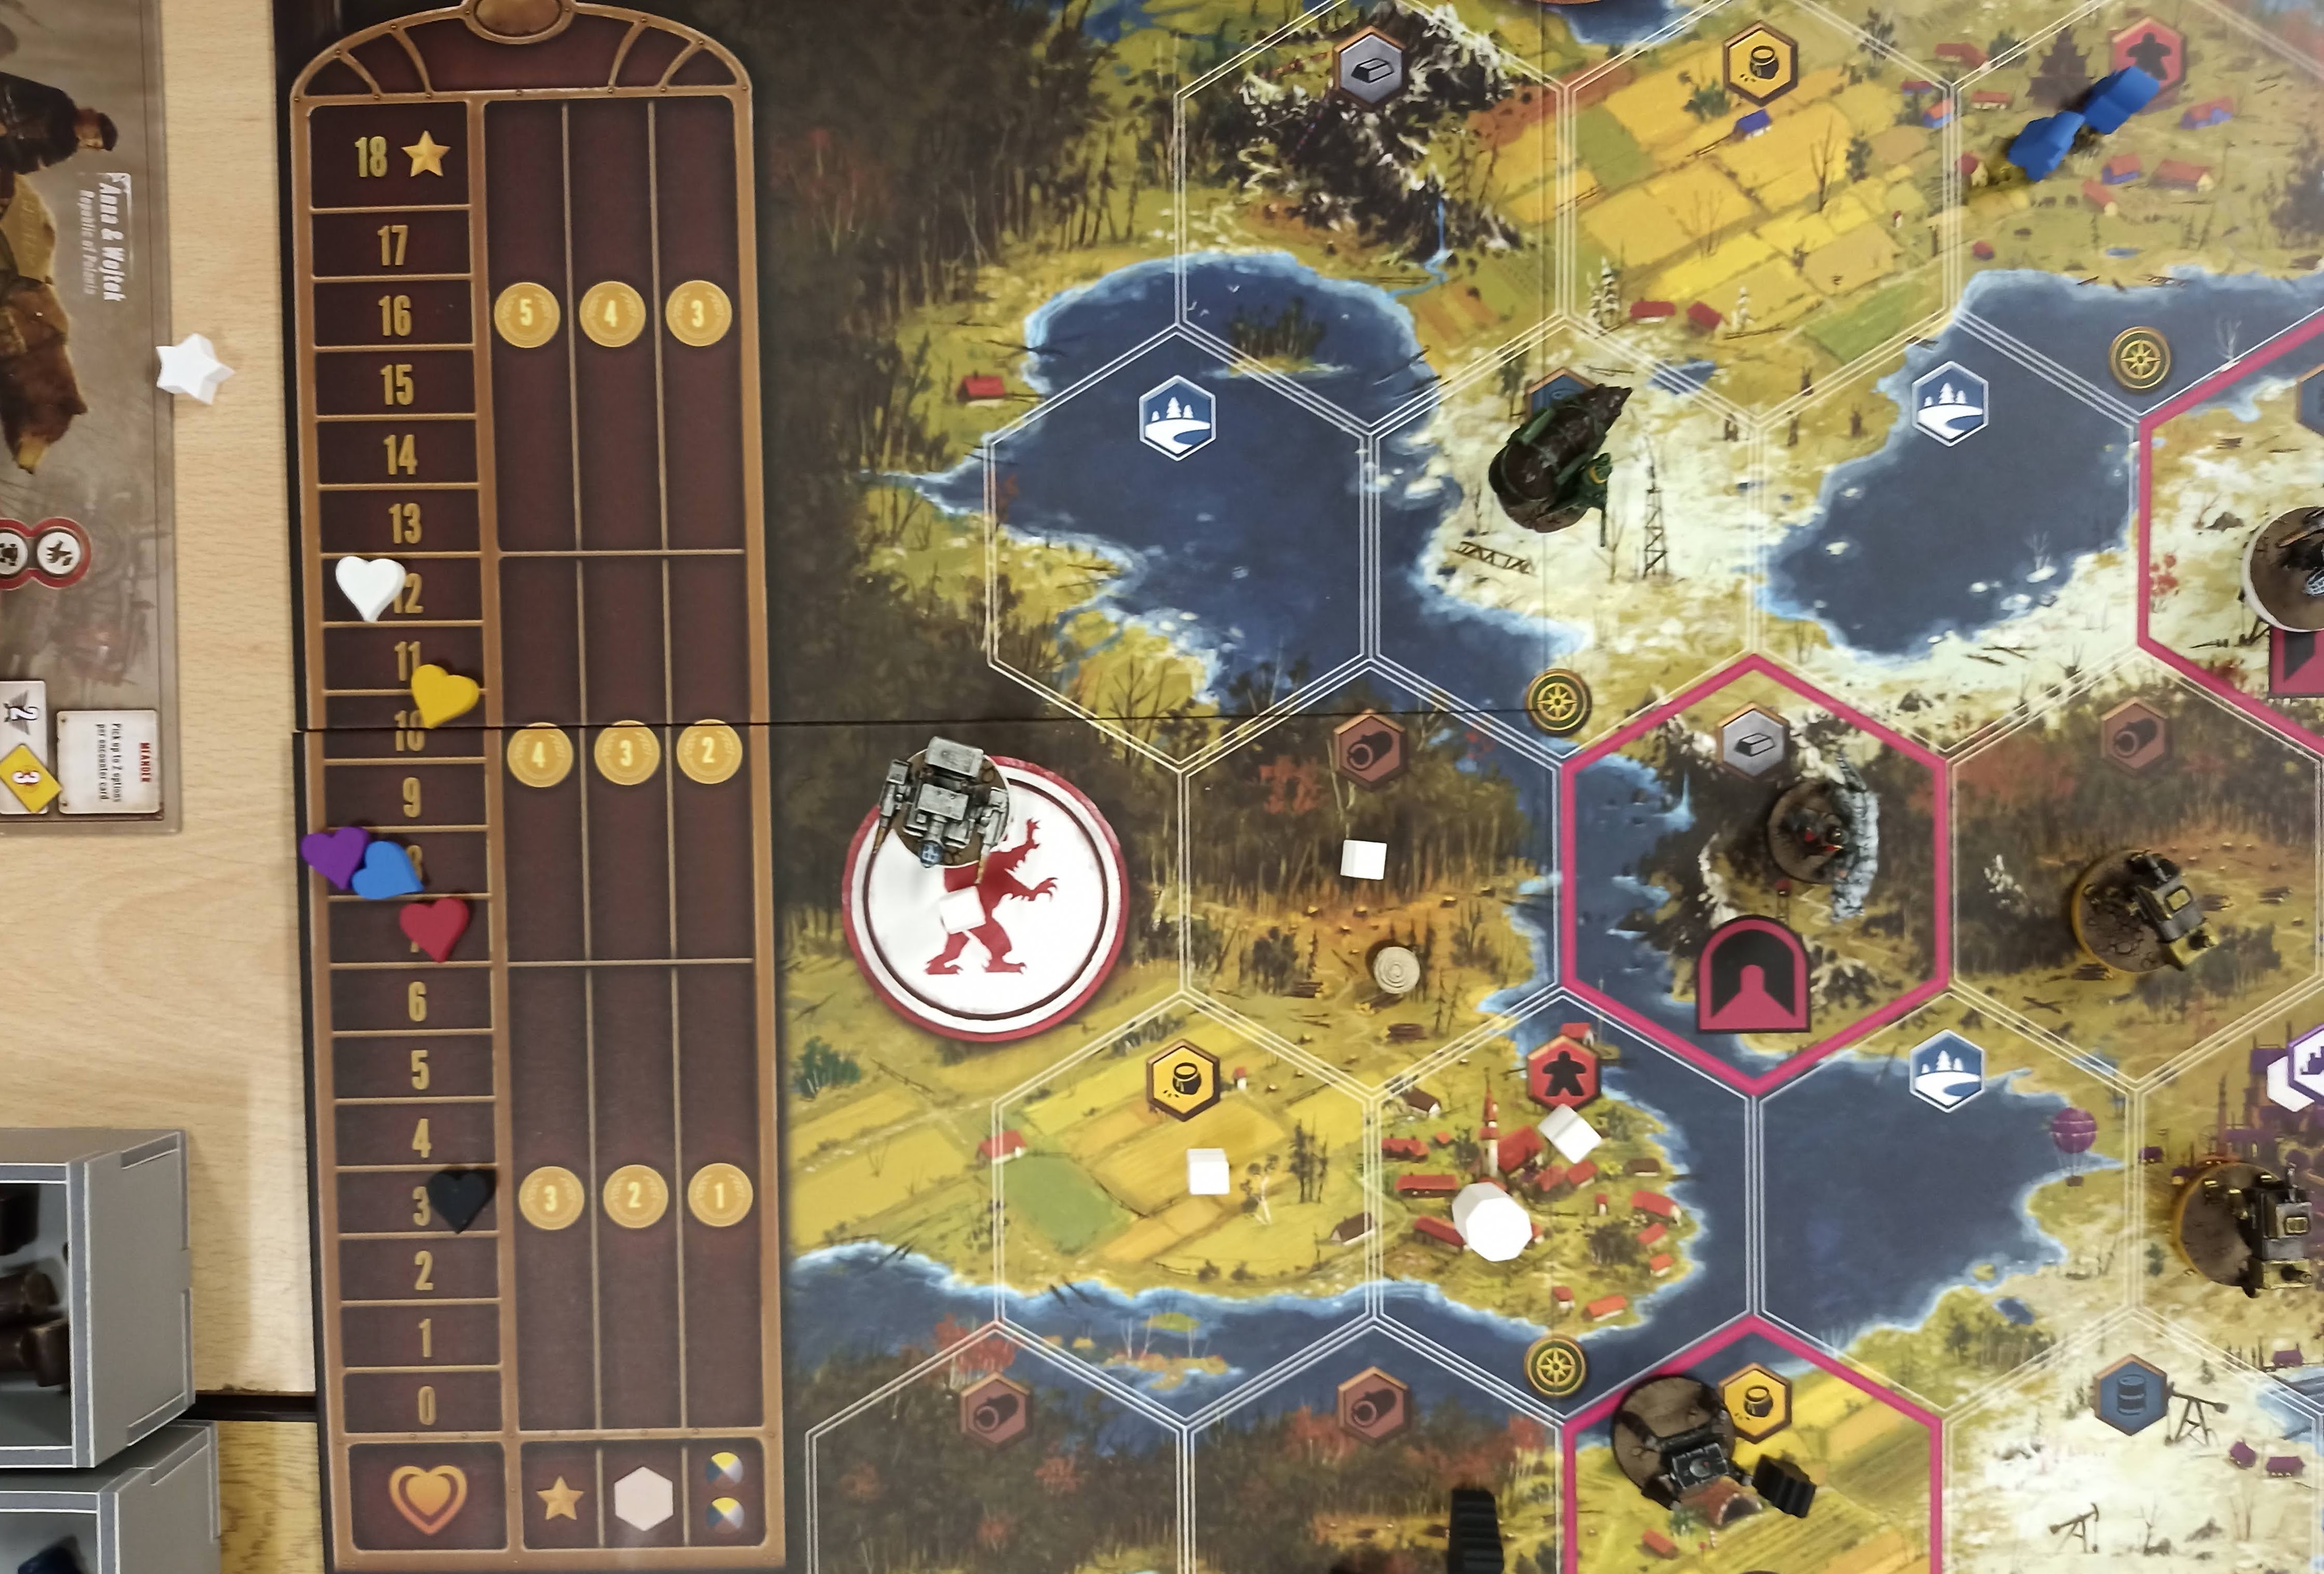 Scythe review: The most-hyped board game of 2016 delivers